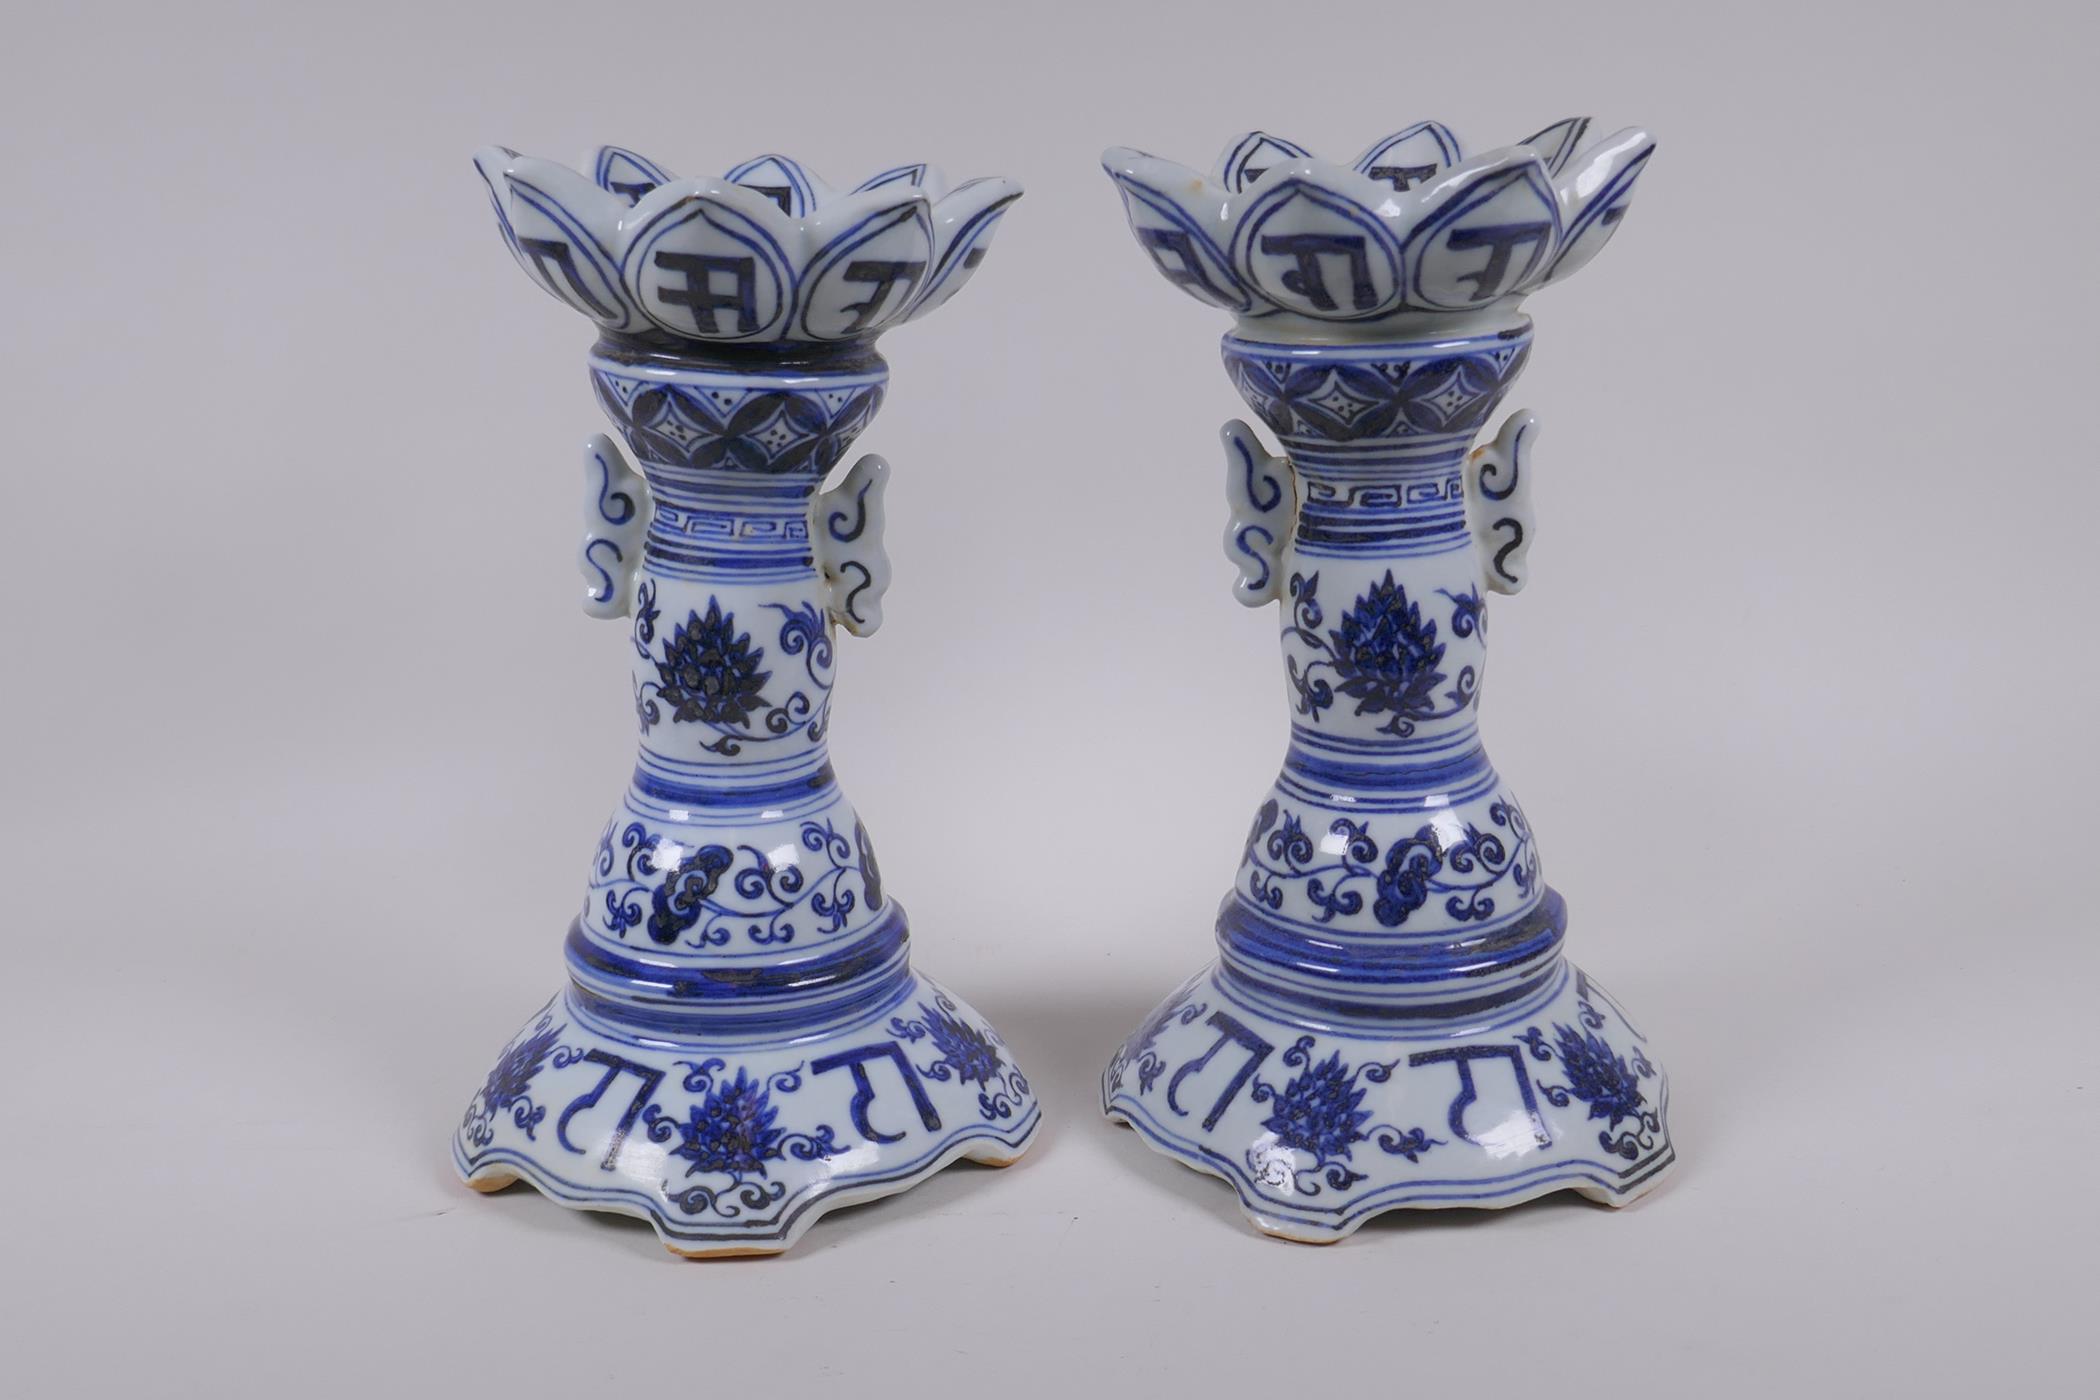 A pair of Chinese blue and white porcelain candlesticks of lotus flower form, with two handles and